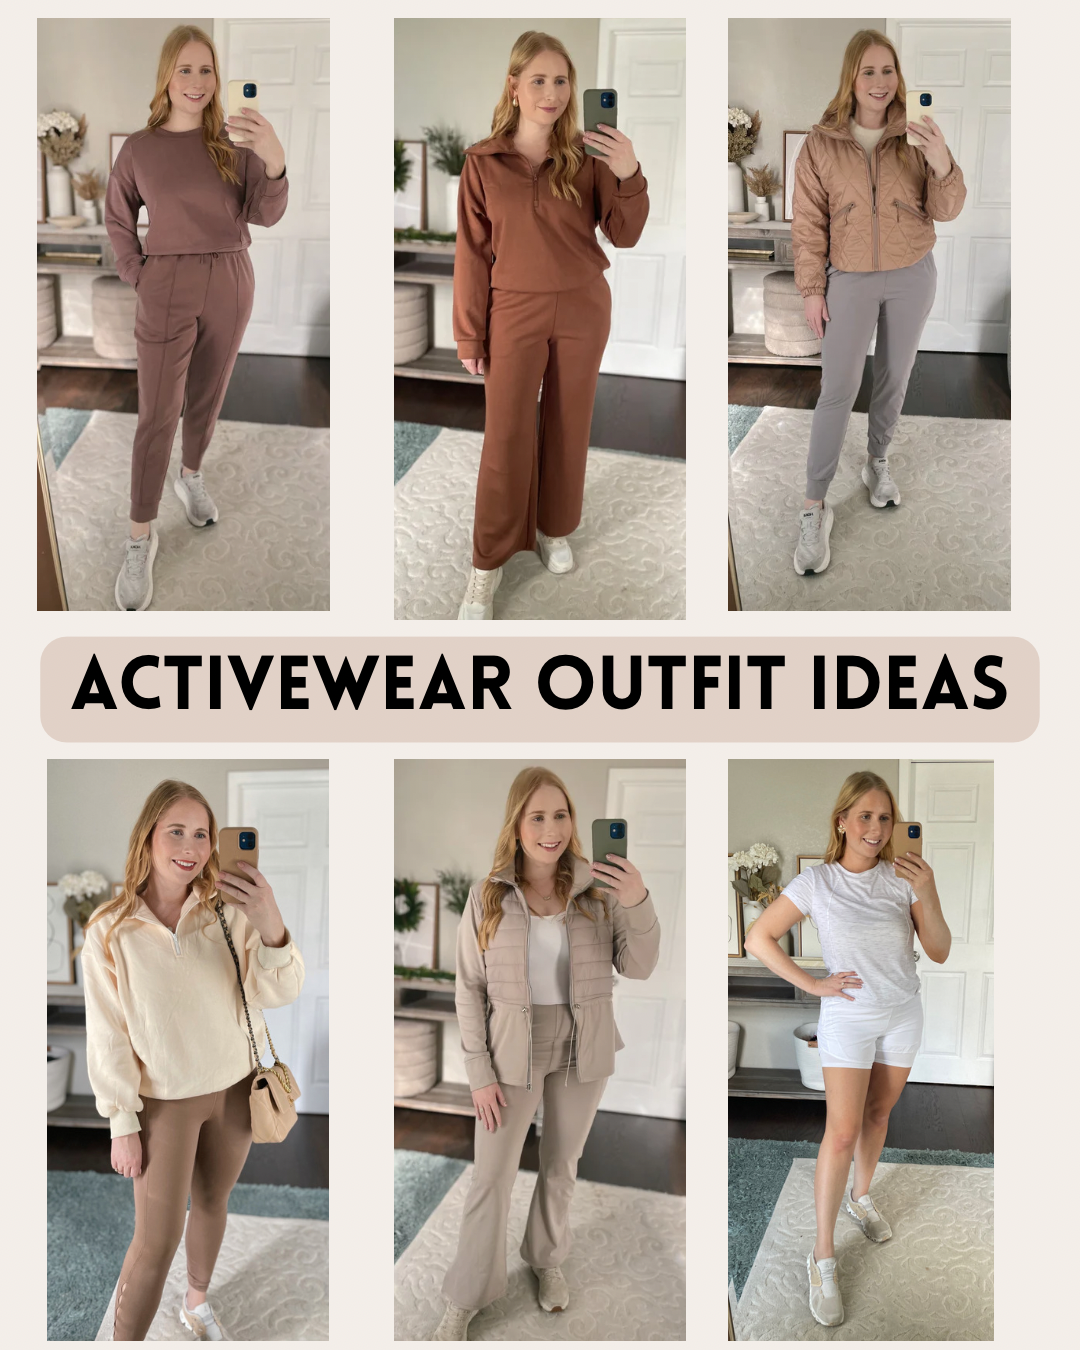 Activewear Outfit Ideas and The Best Activewear for Women | Affordable by Amanda